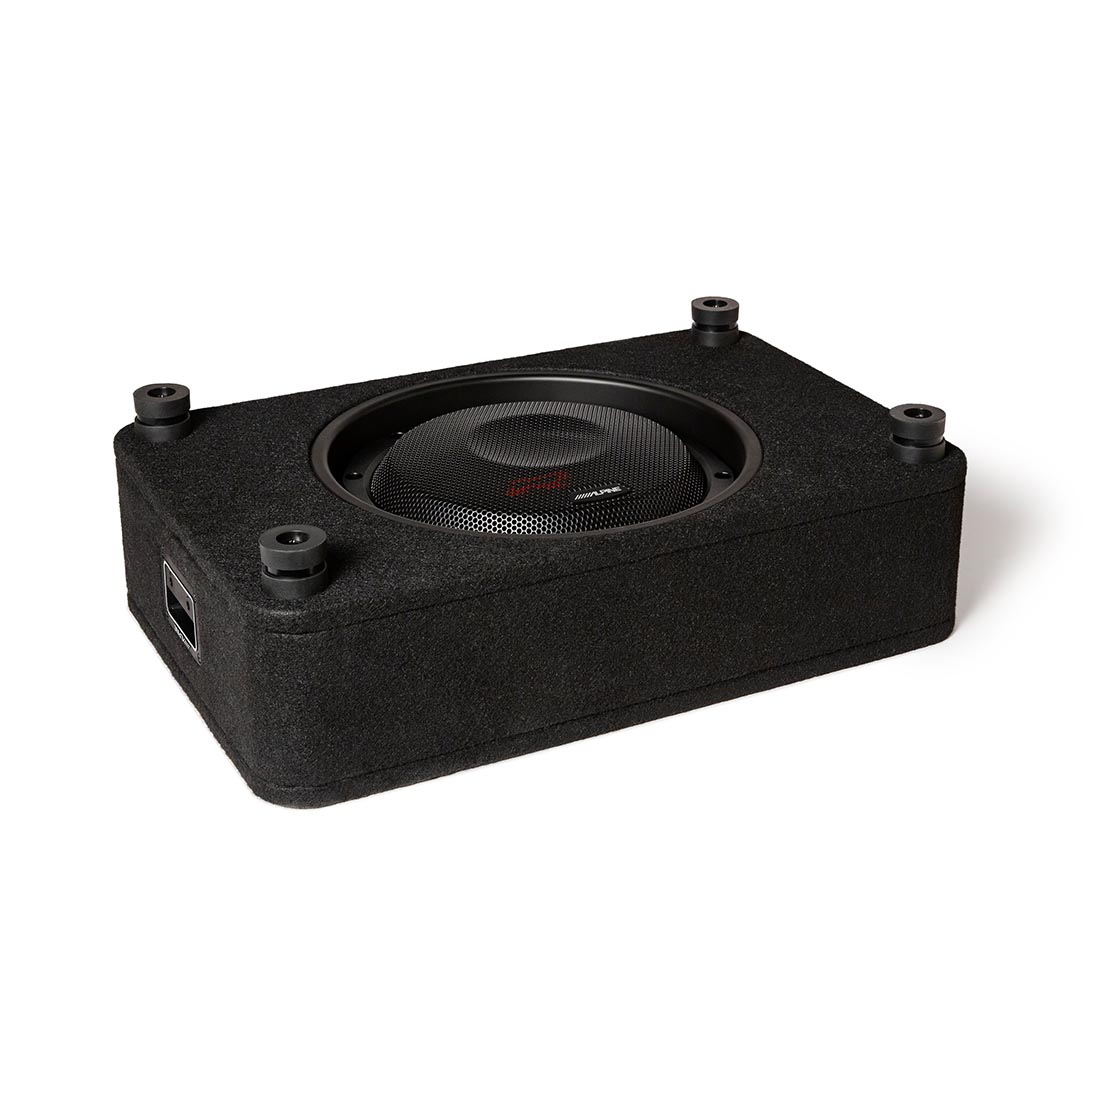 Alpine RS-SB10 10" Halo R-Series Shallow Pre-Loaded Subwoofer Enclosure